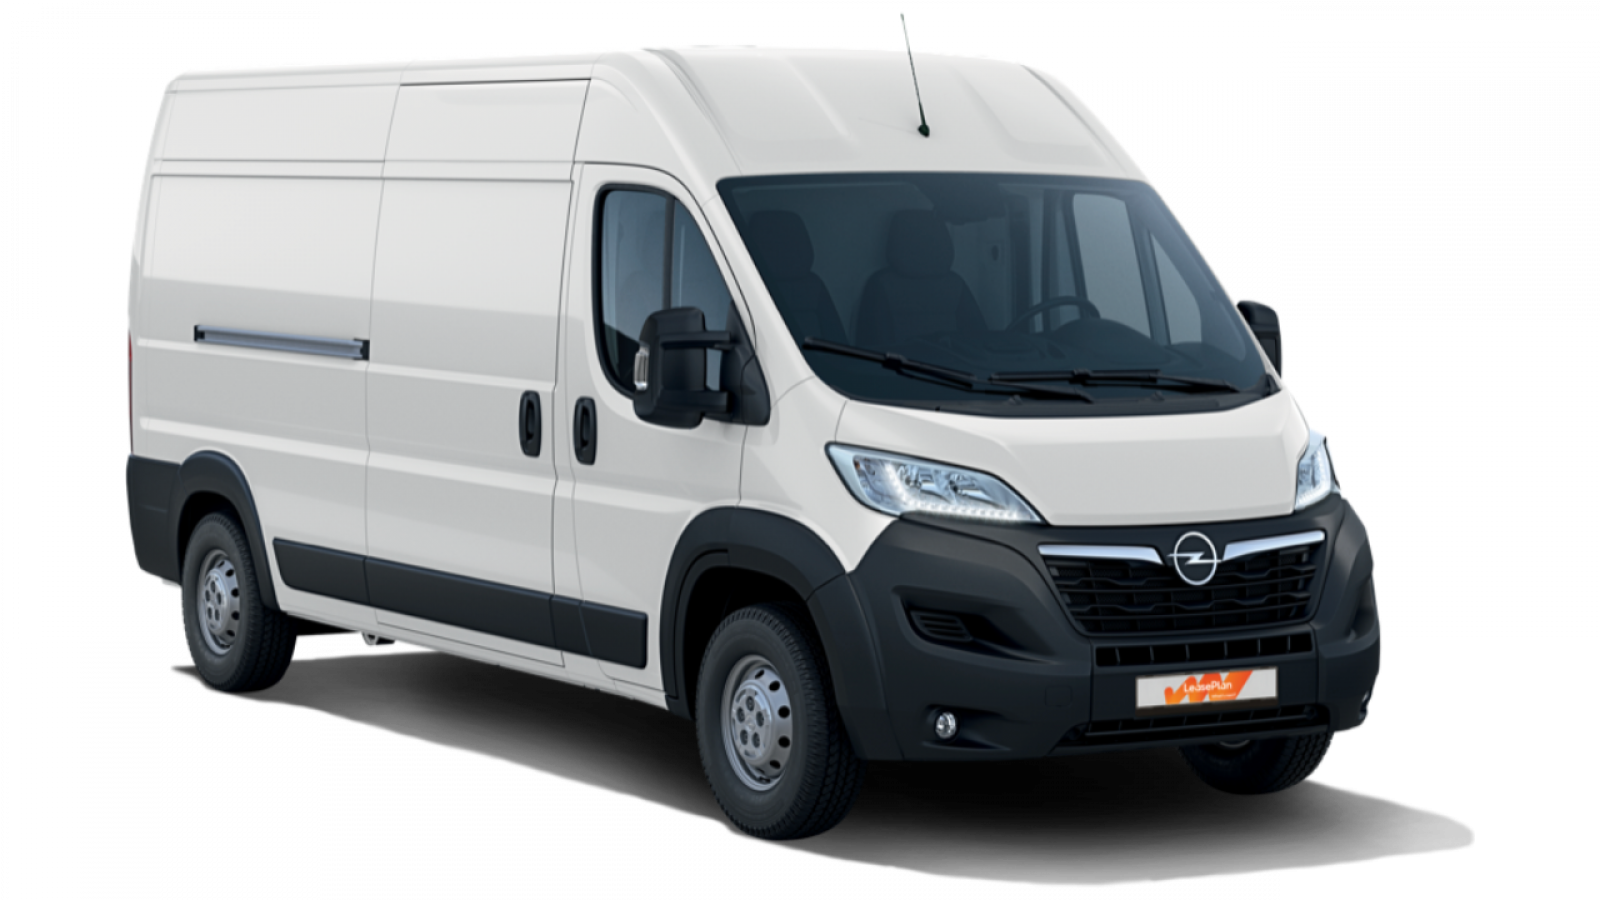 OPEL Movano L4H2 2.2 CDTi 121 kW Edition Heavy large 216209 - operativní leasing